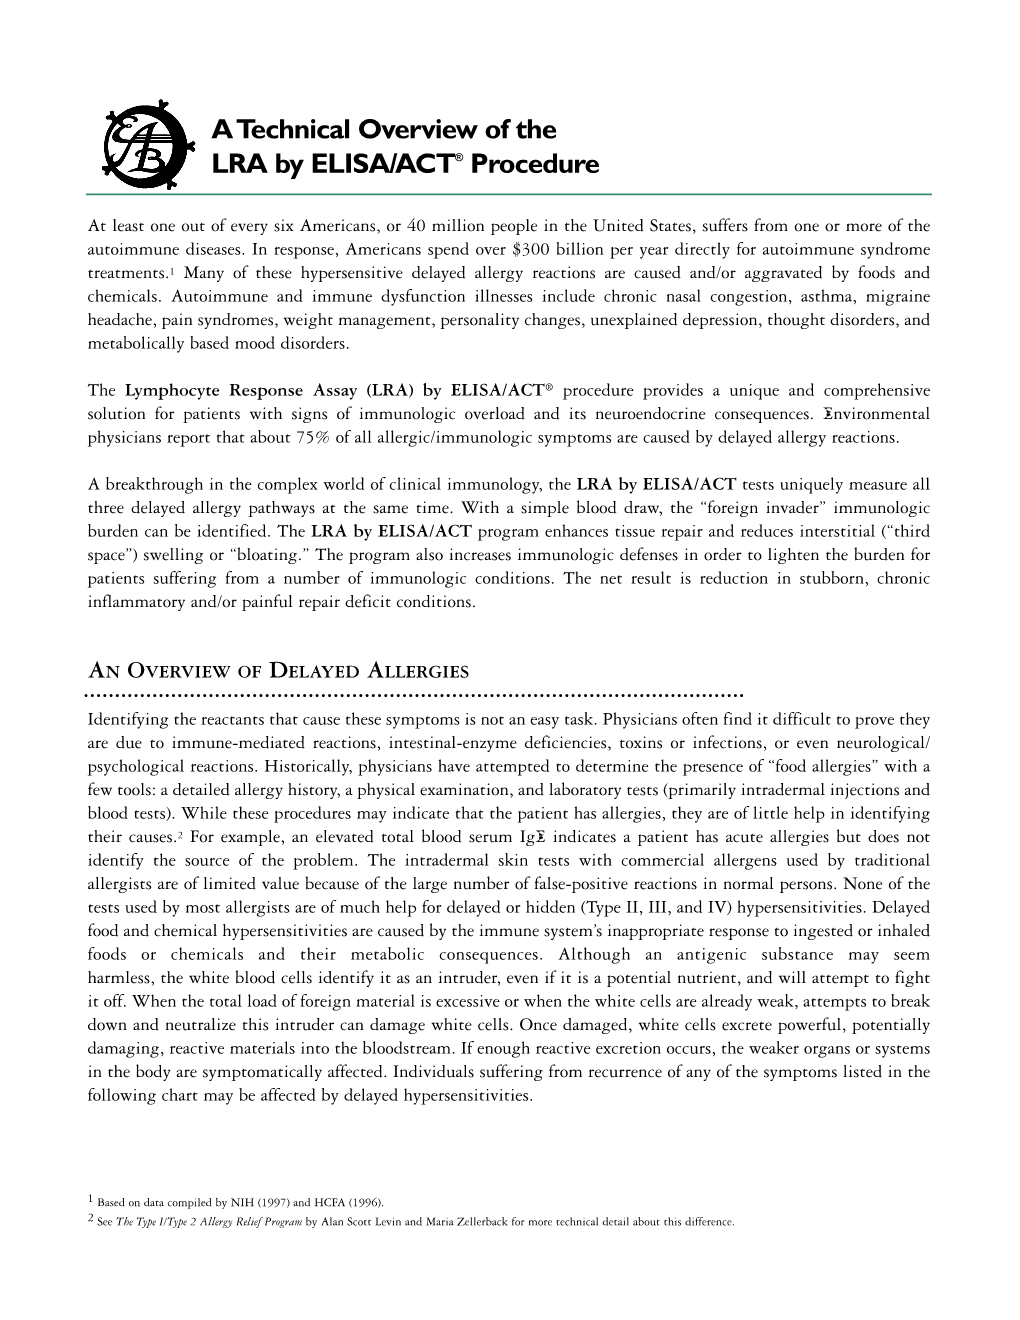 A Technical Overview of the LRA by ELISA/ACT® Procedure